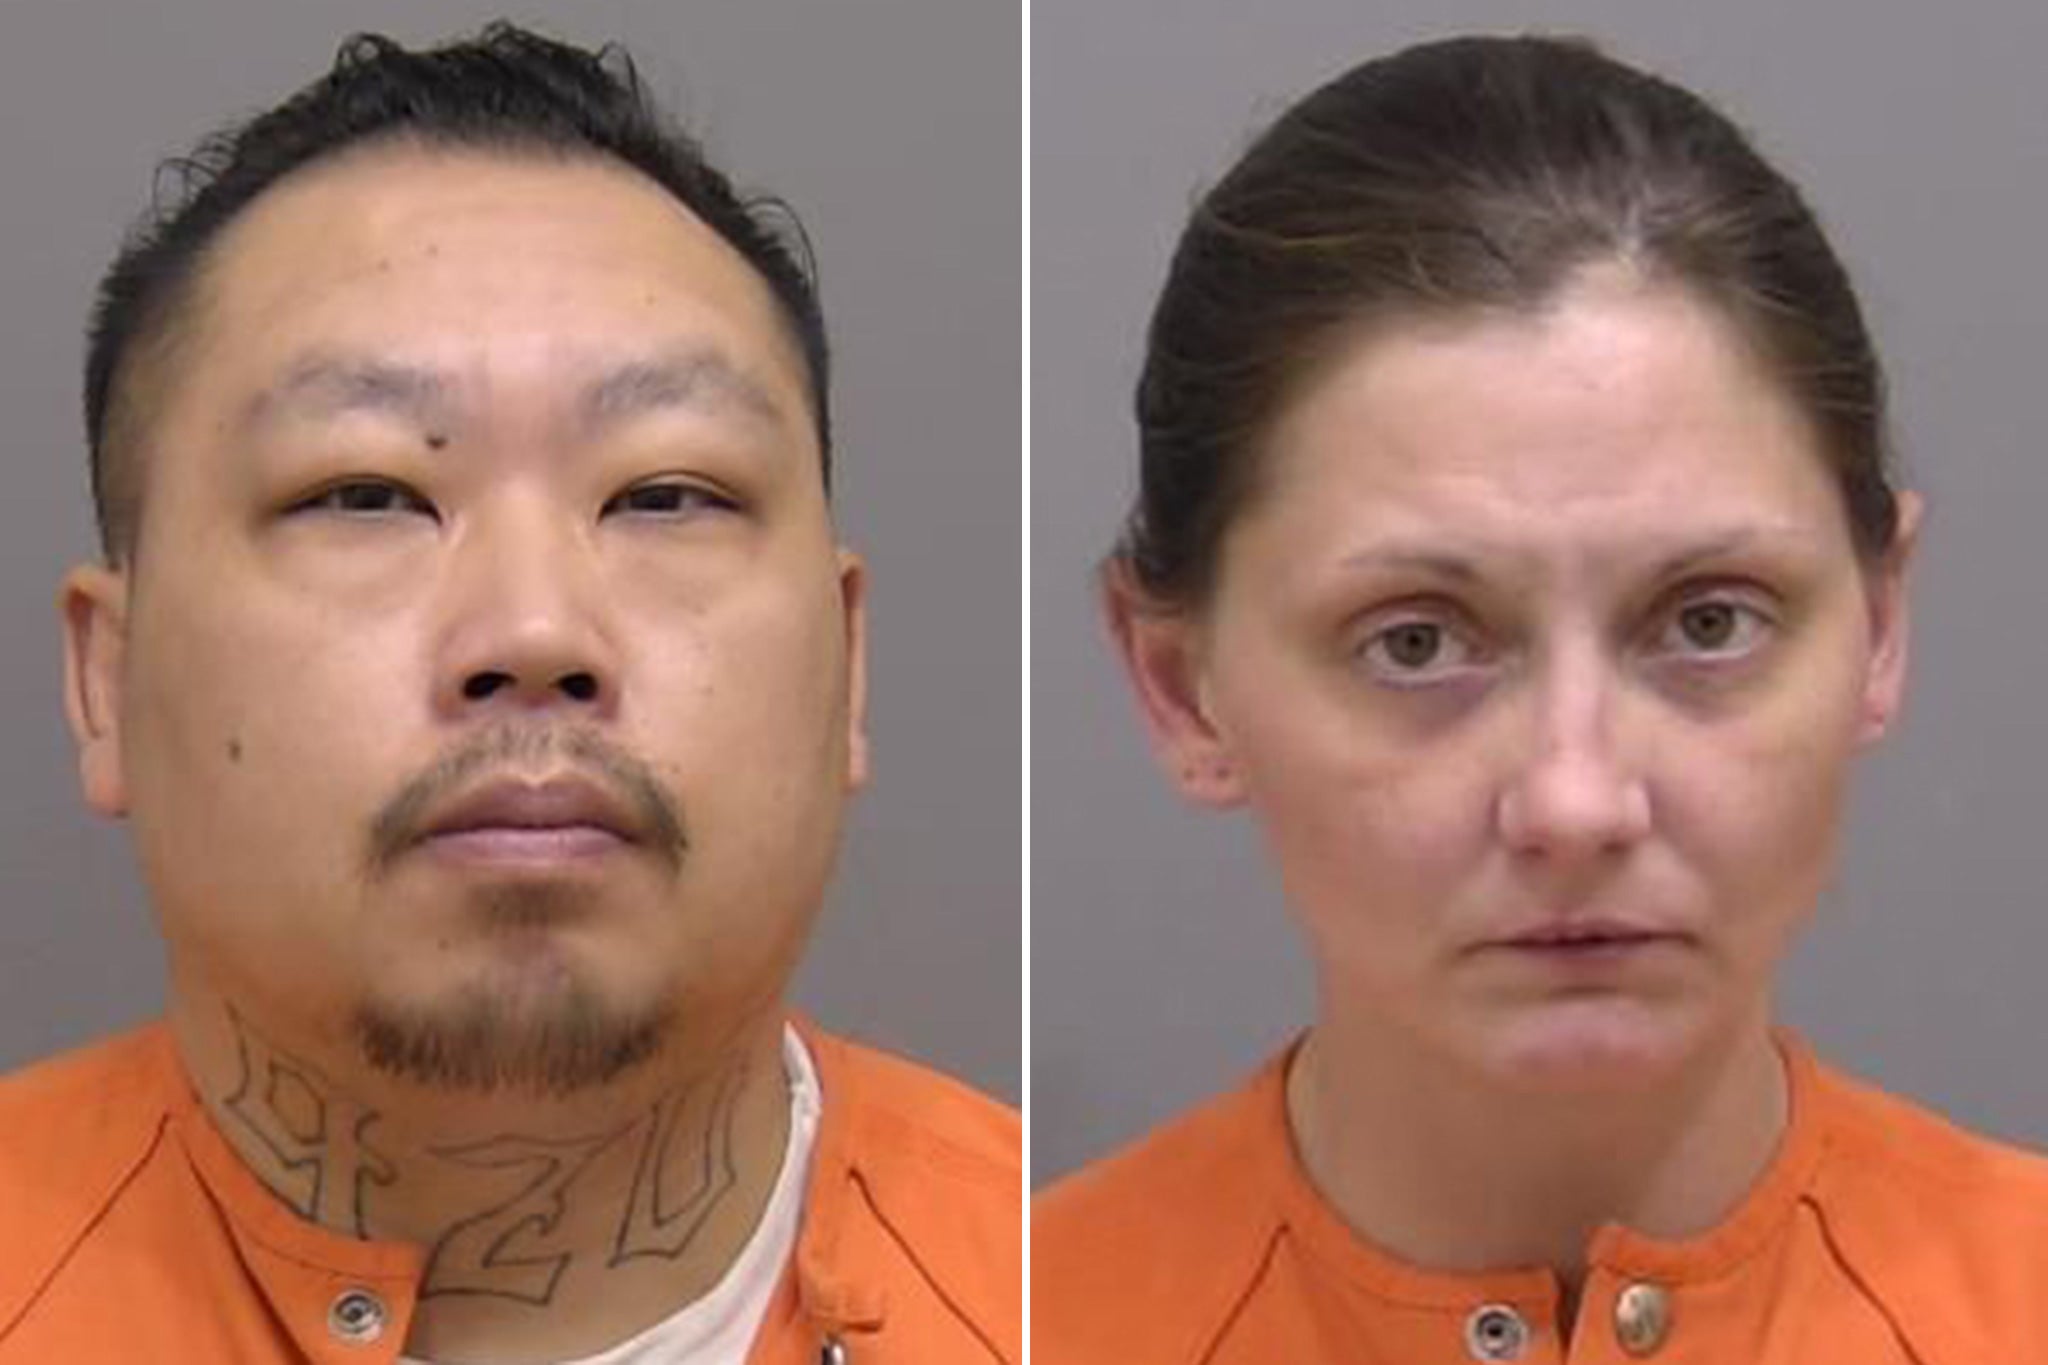 Jesse Vang and Katrina Baur were arrested and slammed with child neglect charges